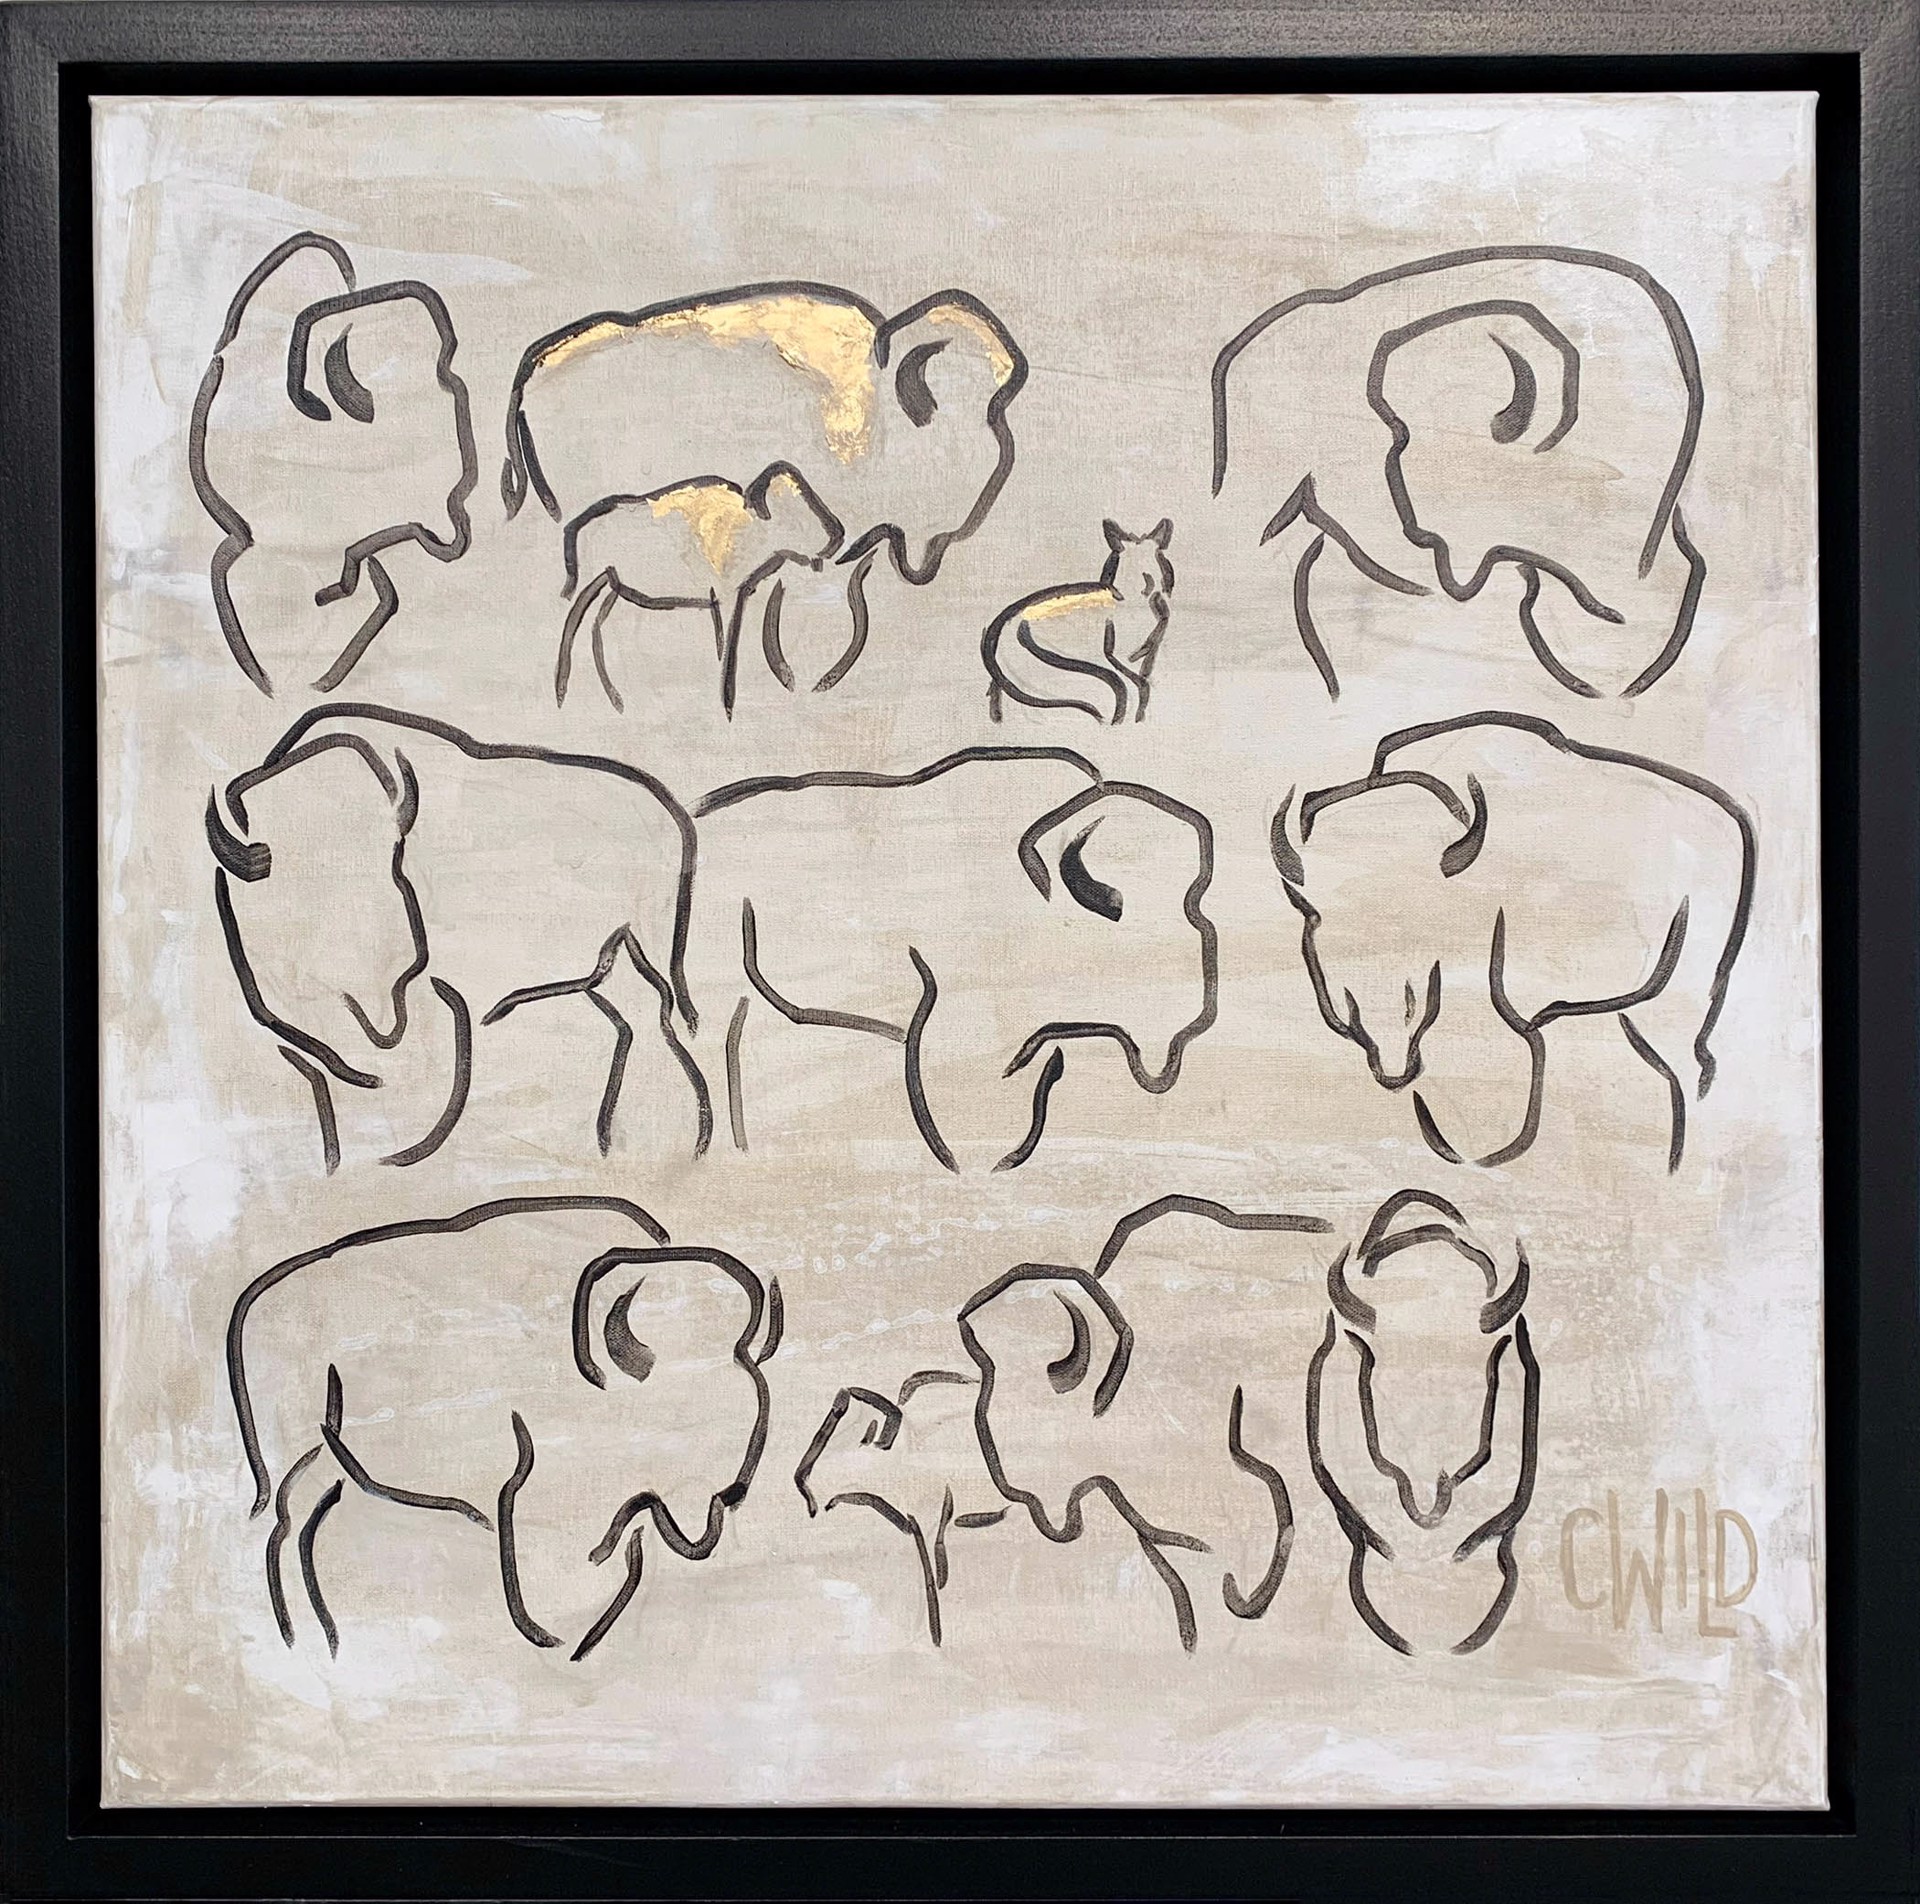 A Part Of Carrie Wild's Rendezvous Series Of A Herd Of Black and White Bison